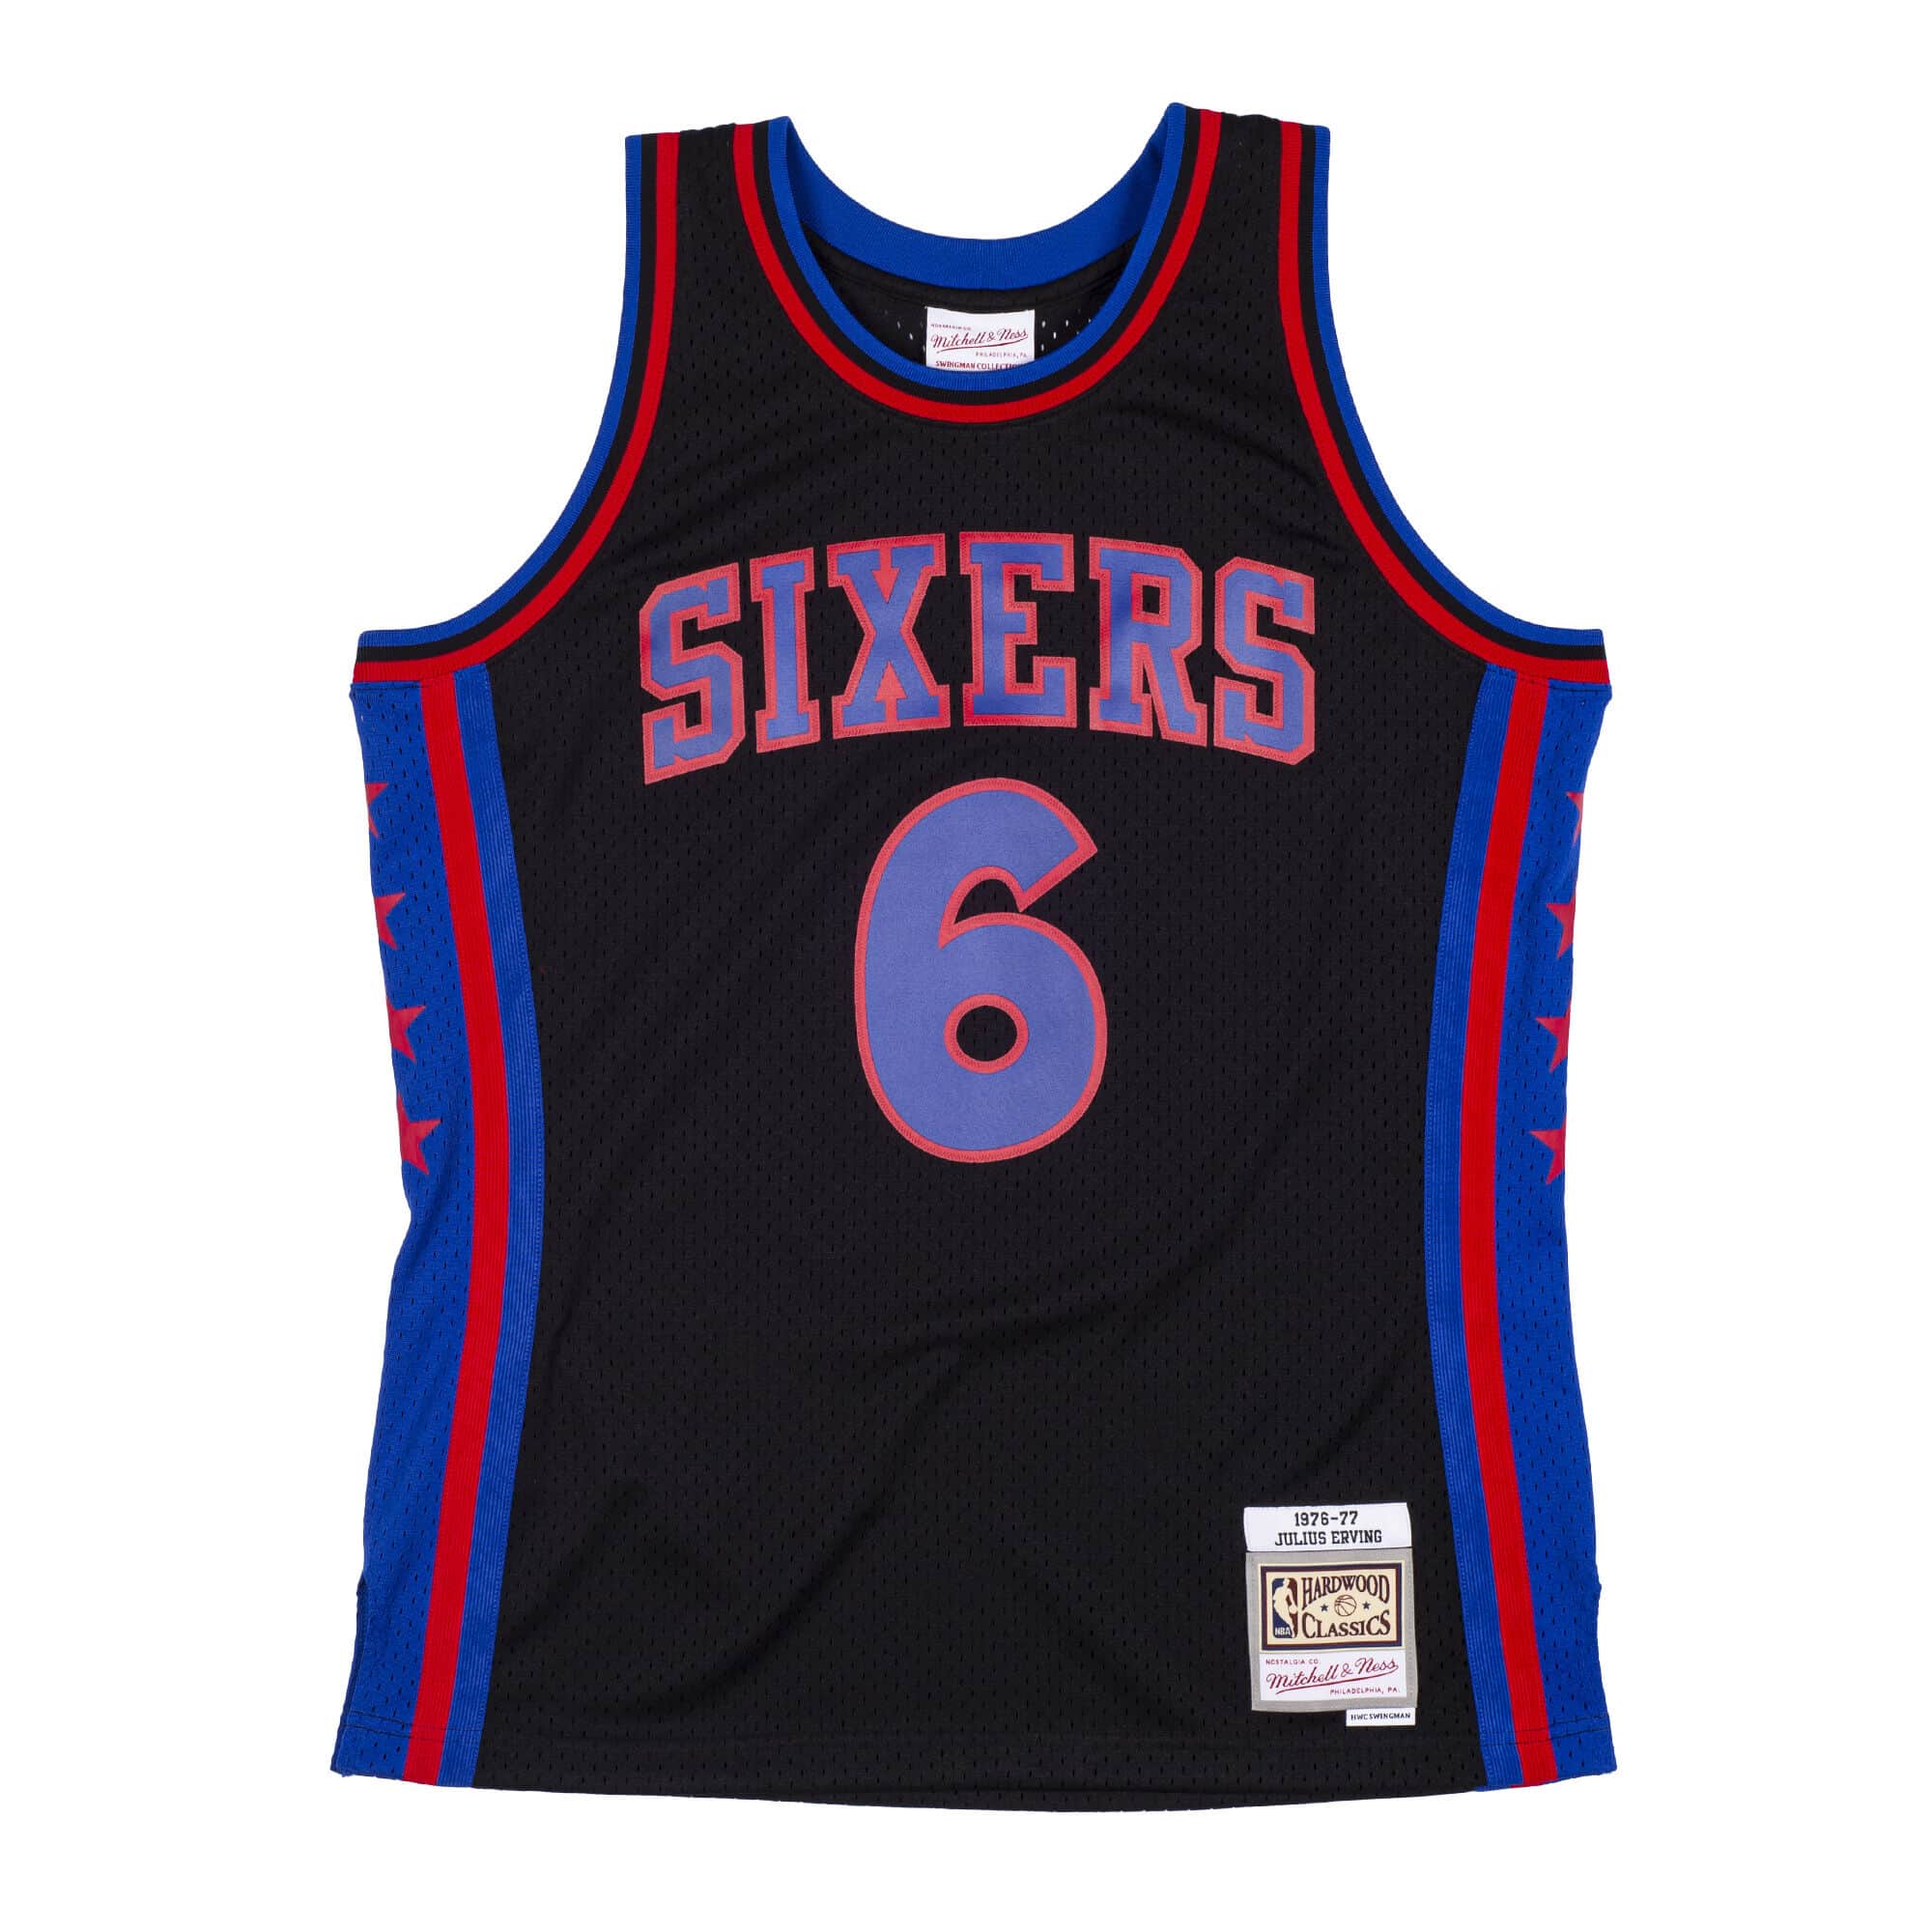 Sixers Gifts & Merchandise for Sale